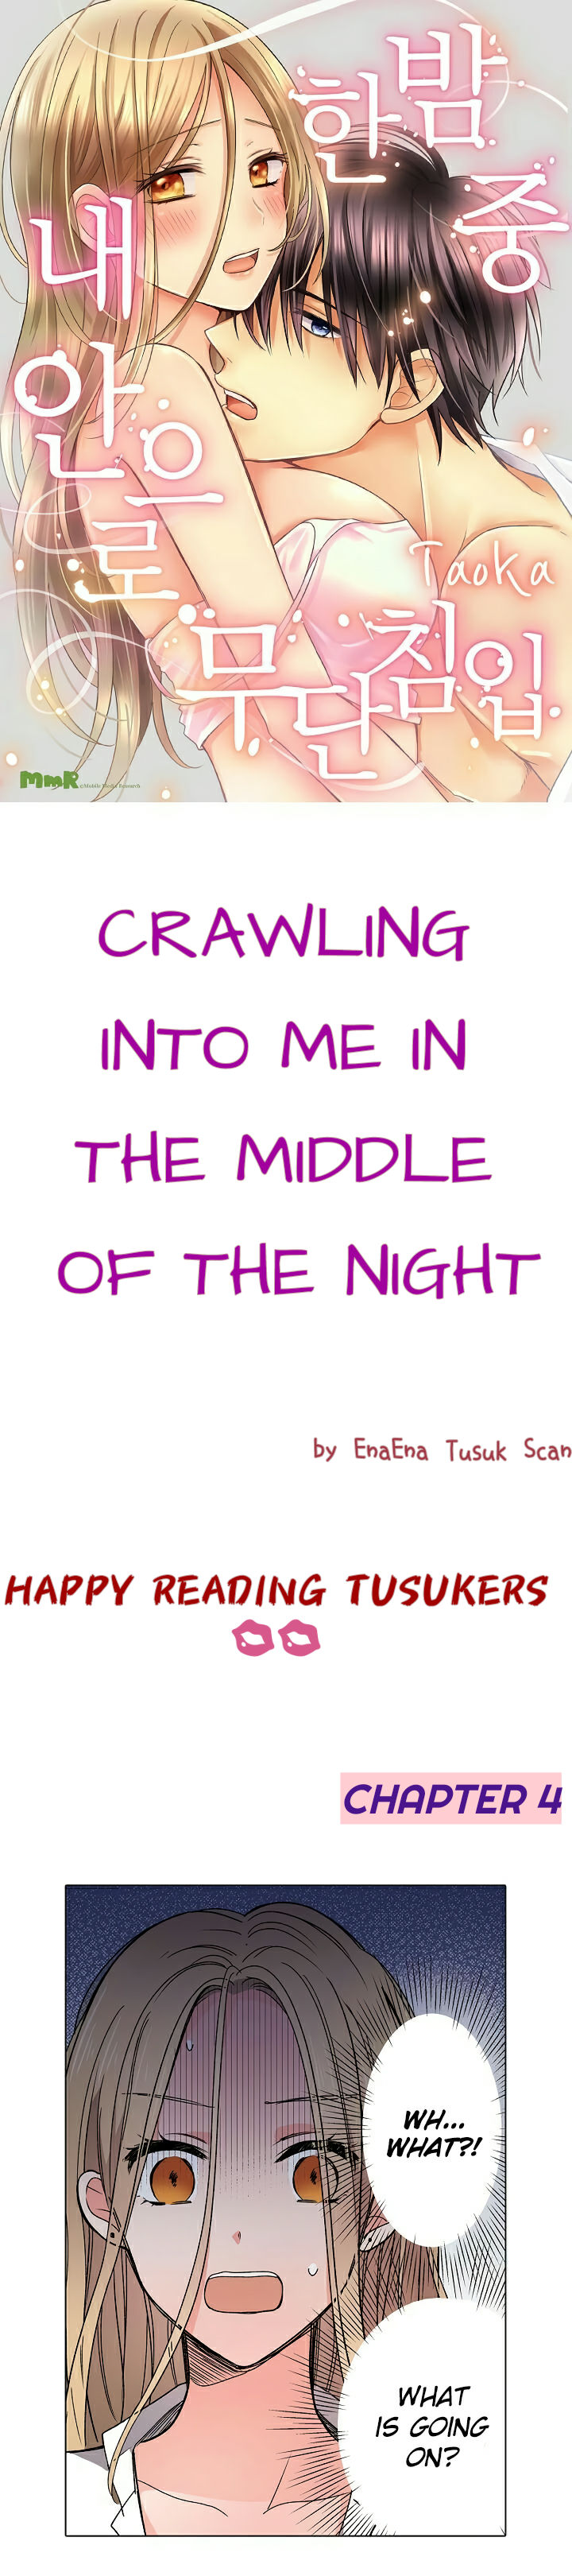 Crawling Into Me in the Middle of the Night - Chapter 4 Page 1